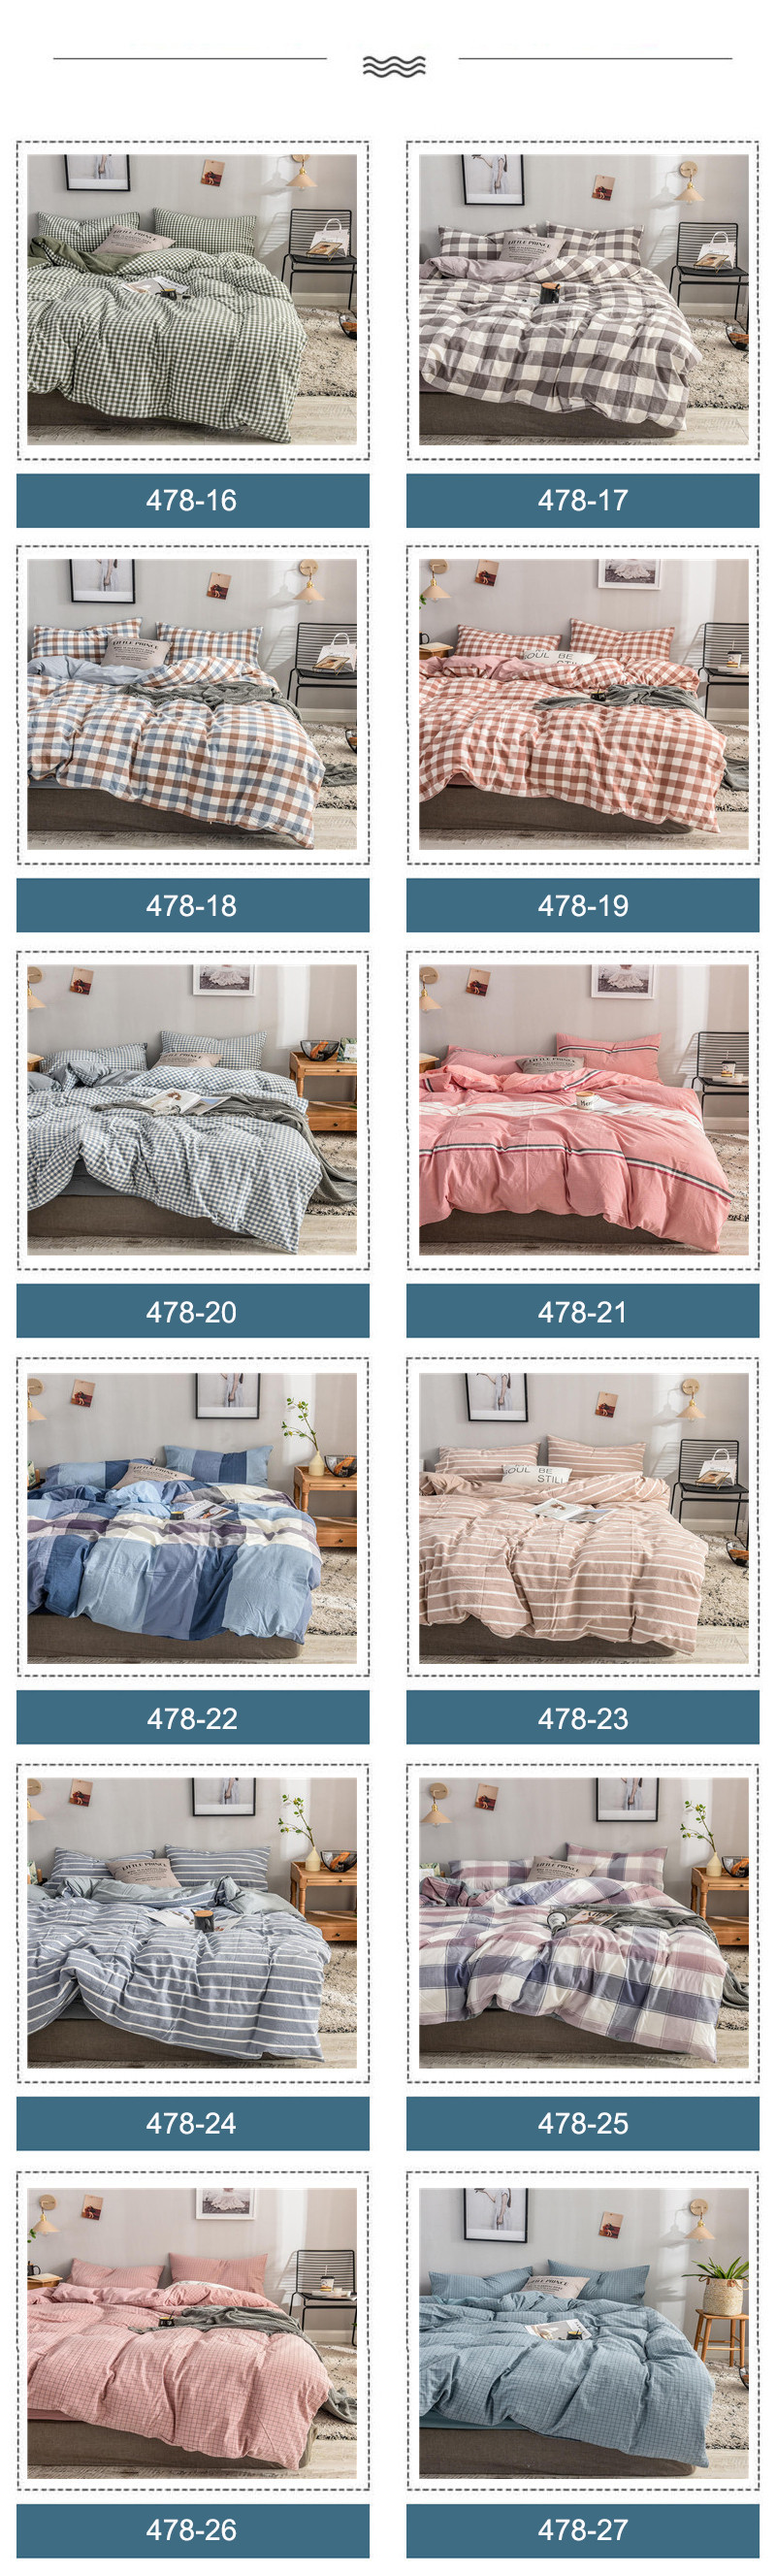 Cheap Price Bedding Made In China